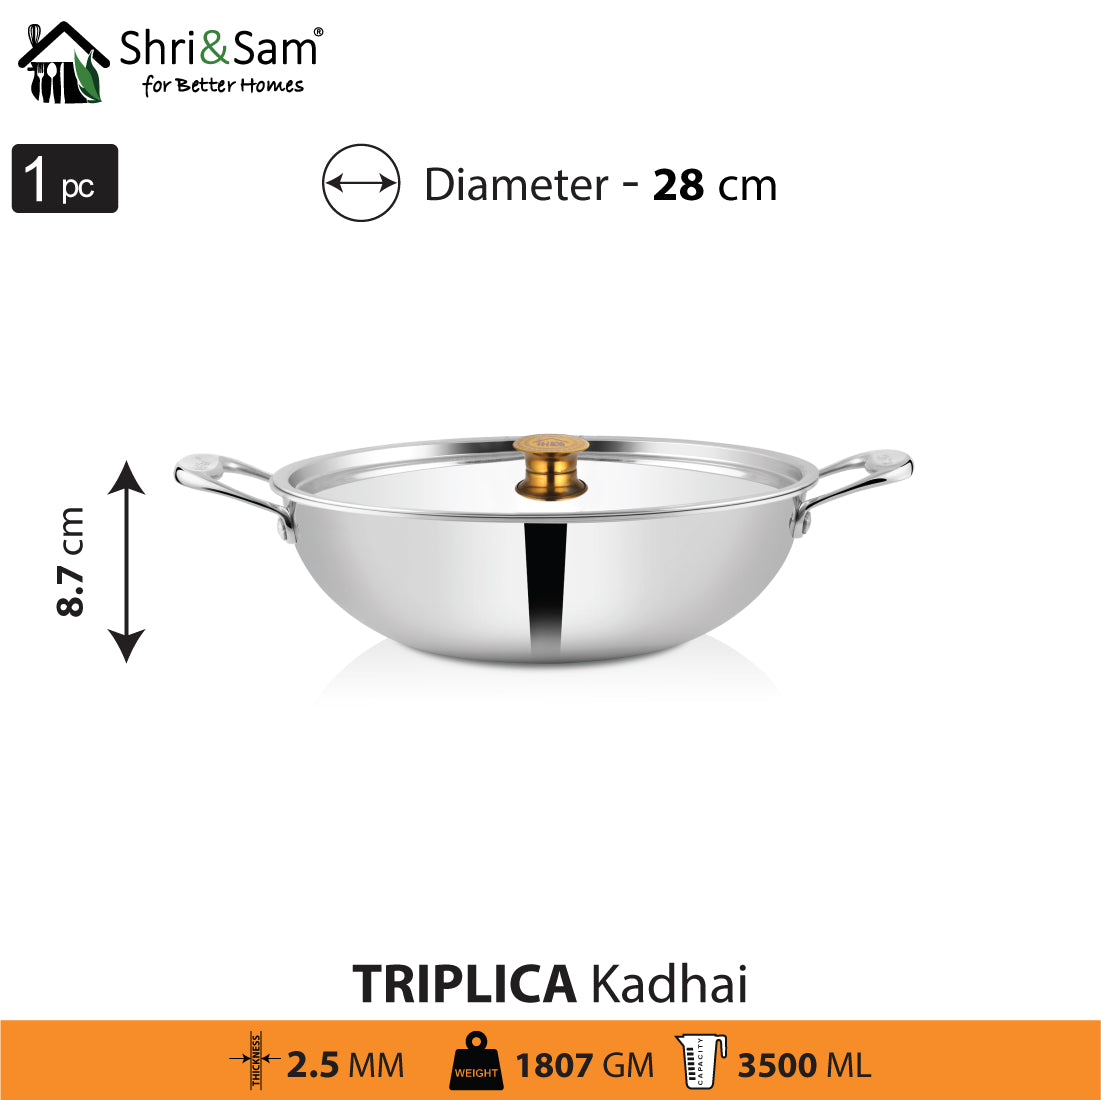 Stainless Steel Triply Kadhai with SS Lid Triplica